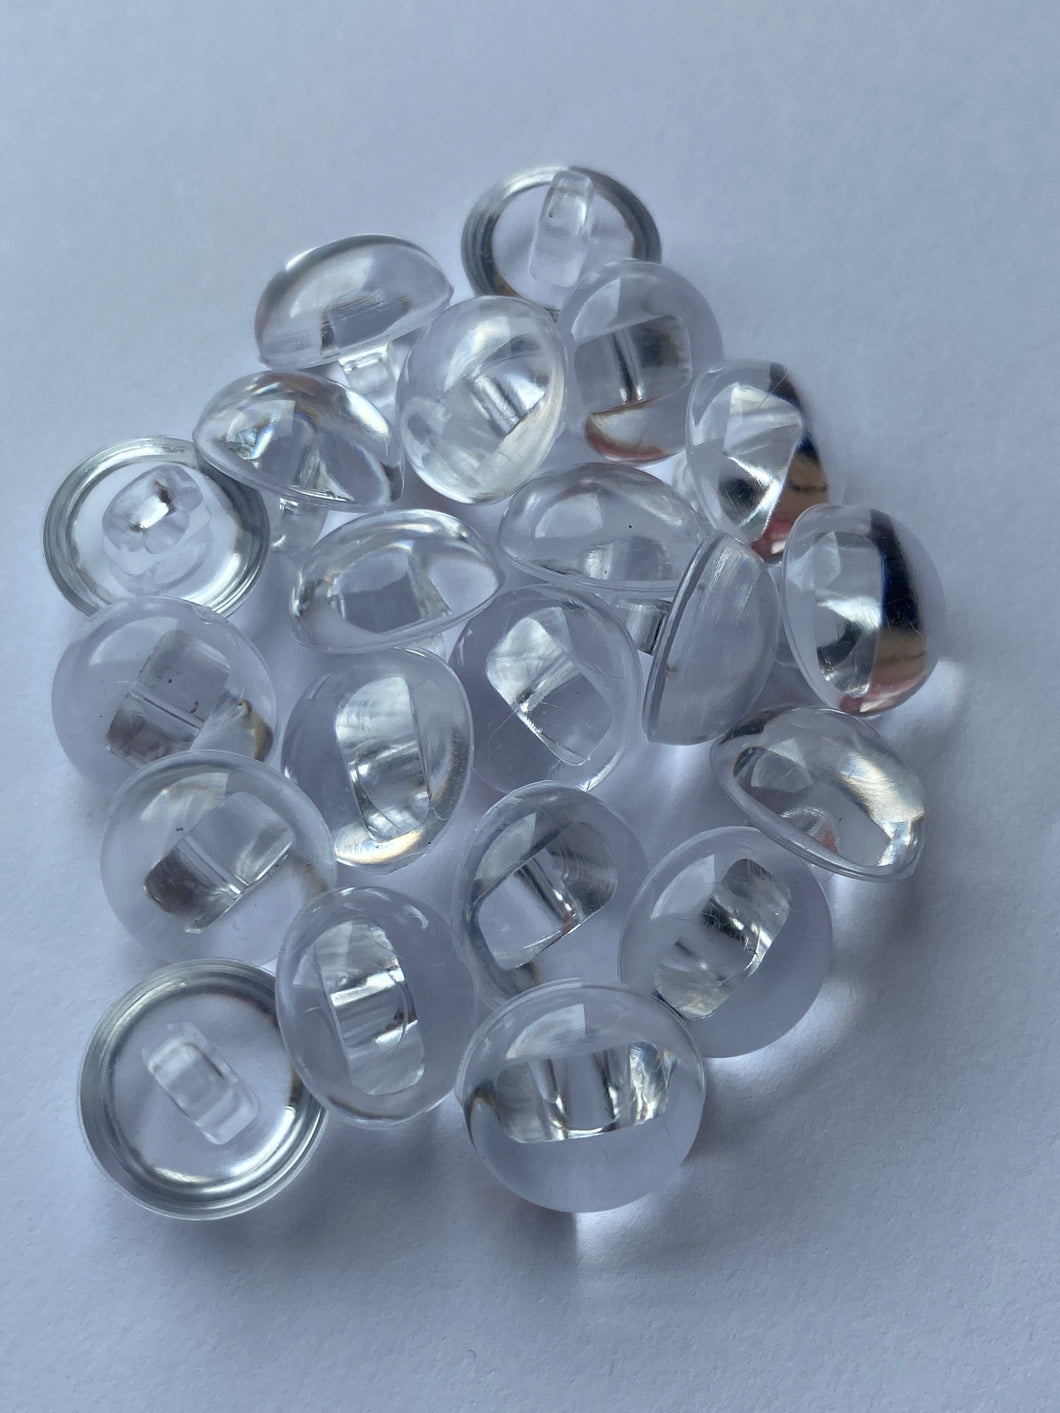 10 Clear Shank Quality Buttons 13mm Wide Dresses Tops Coats Babies Blazers Shirt Sewing Craft ##